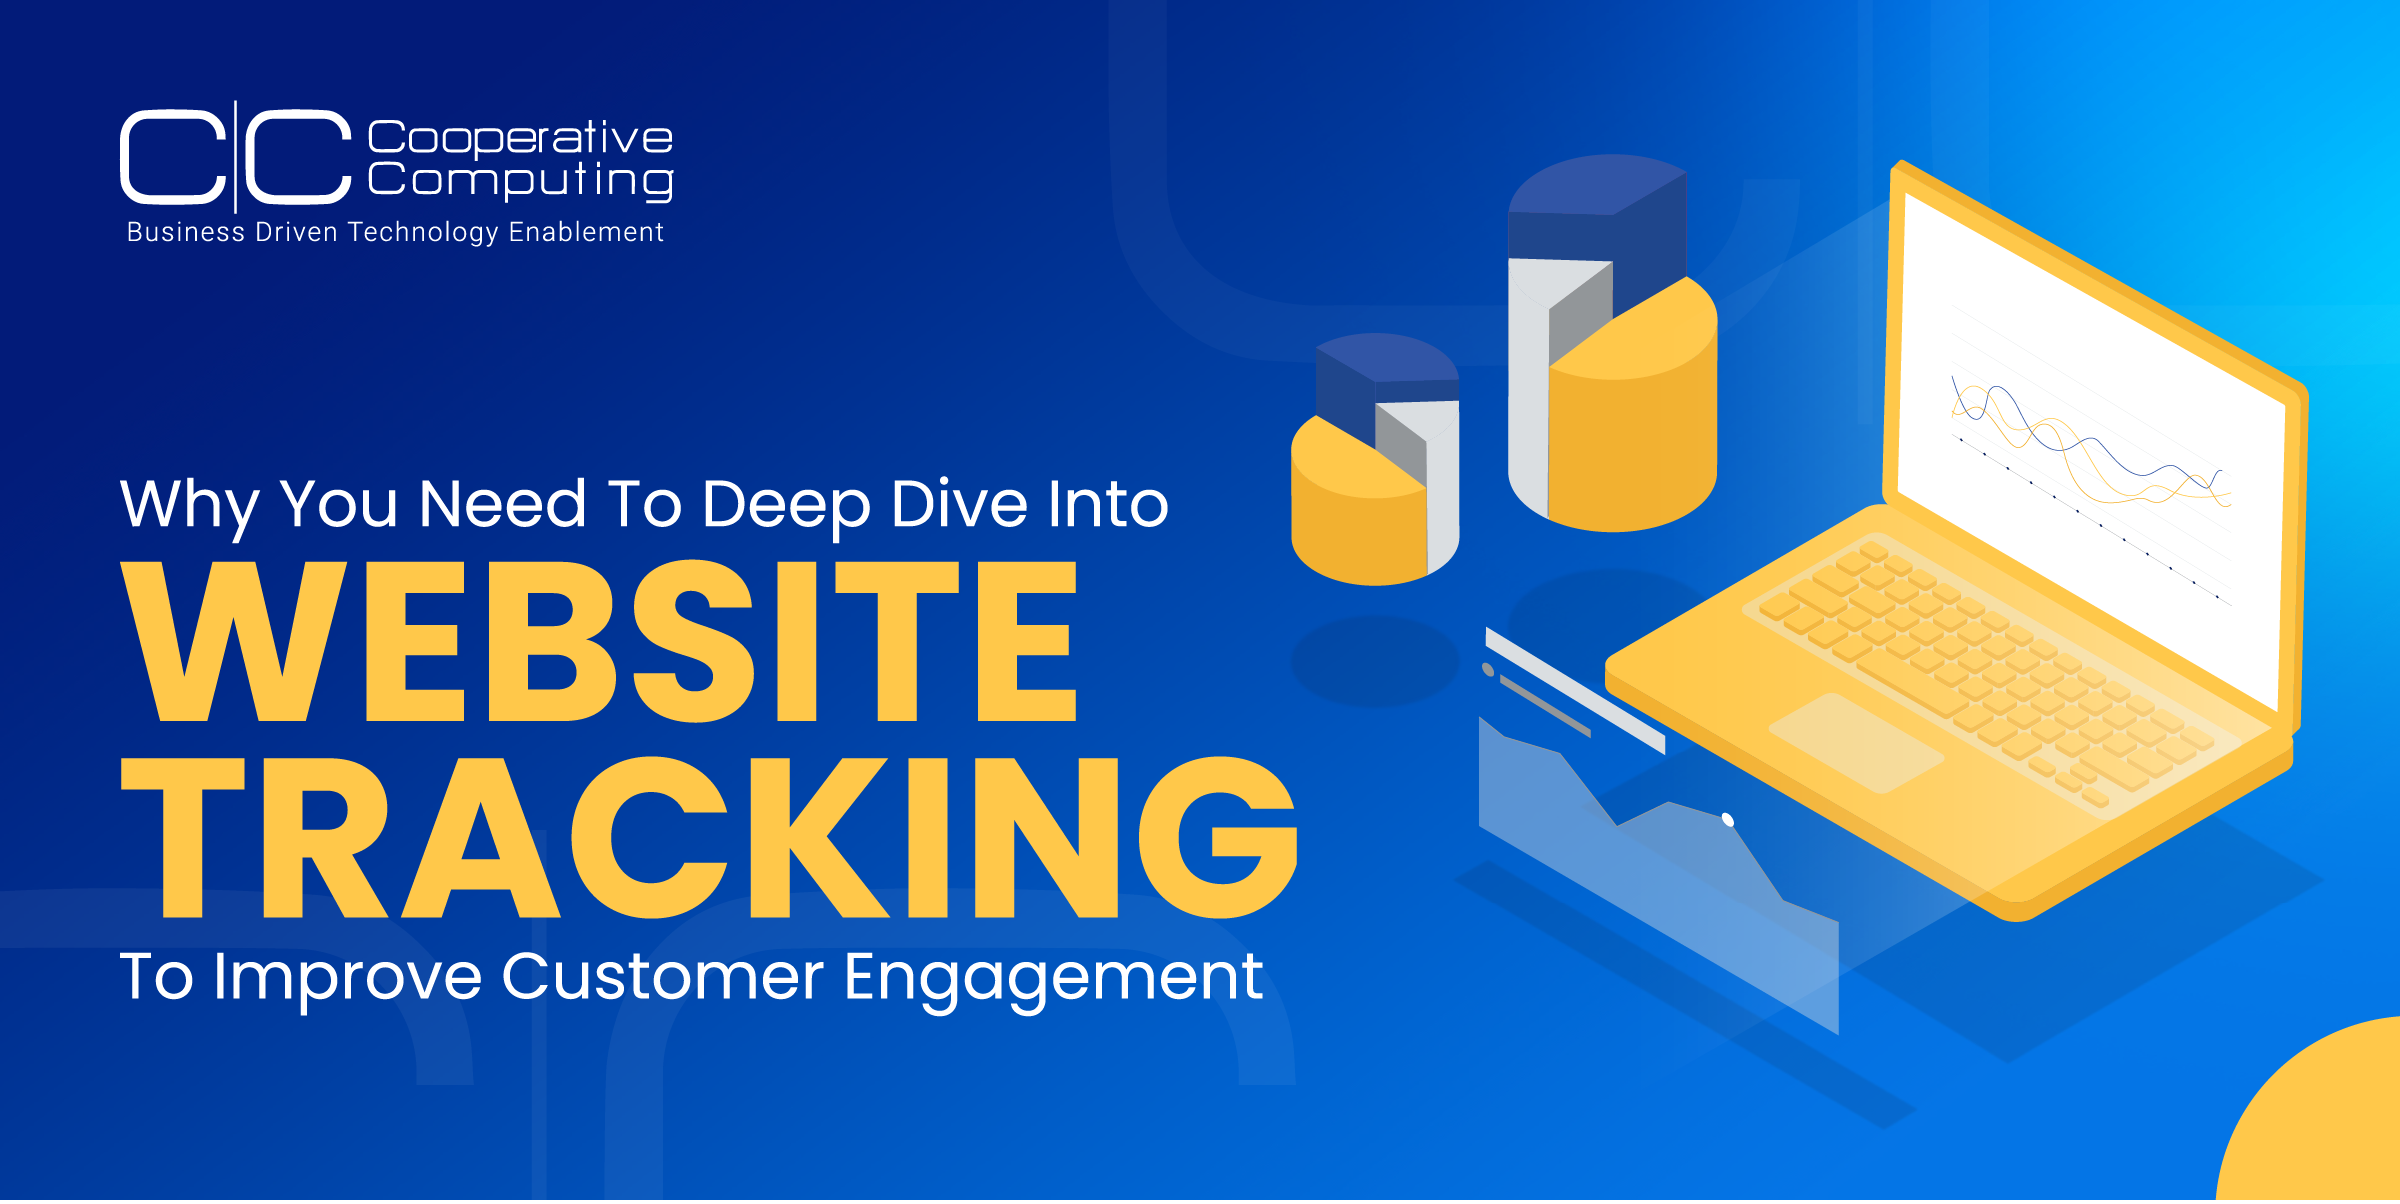 Why You Need to Deep Dive into Website Tracking to Improve Customer Engagement